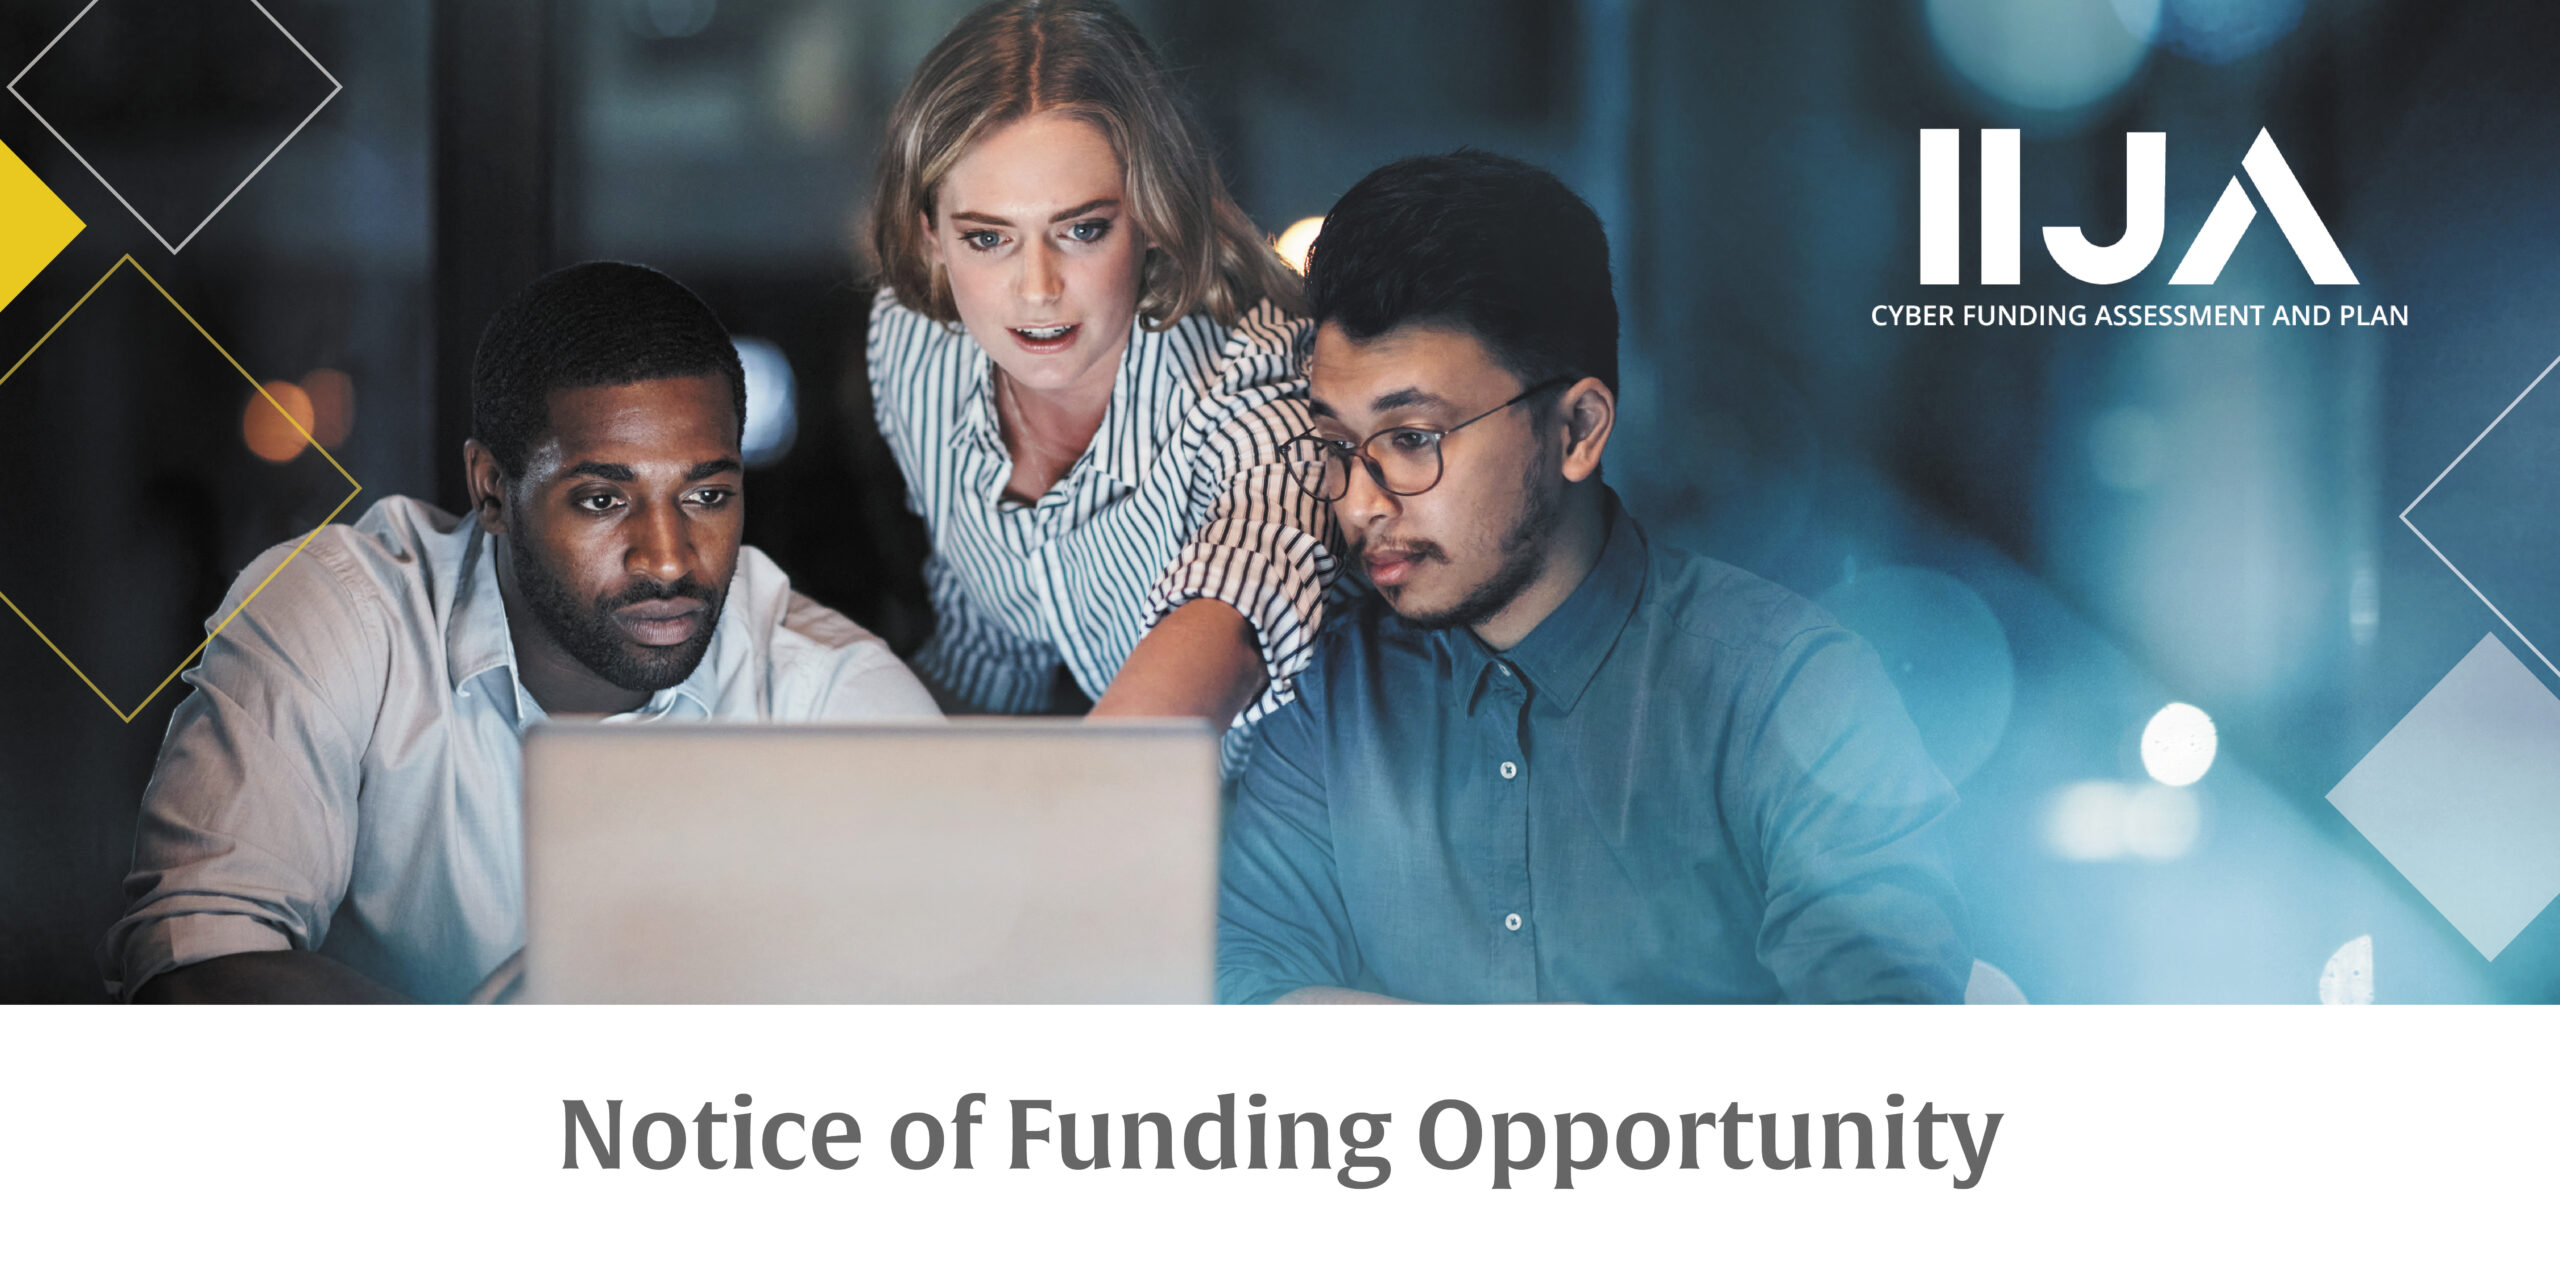 Apply now for a cybersecurity grant under the Infrastructure Investment and Jobs Act (IIJA)